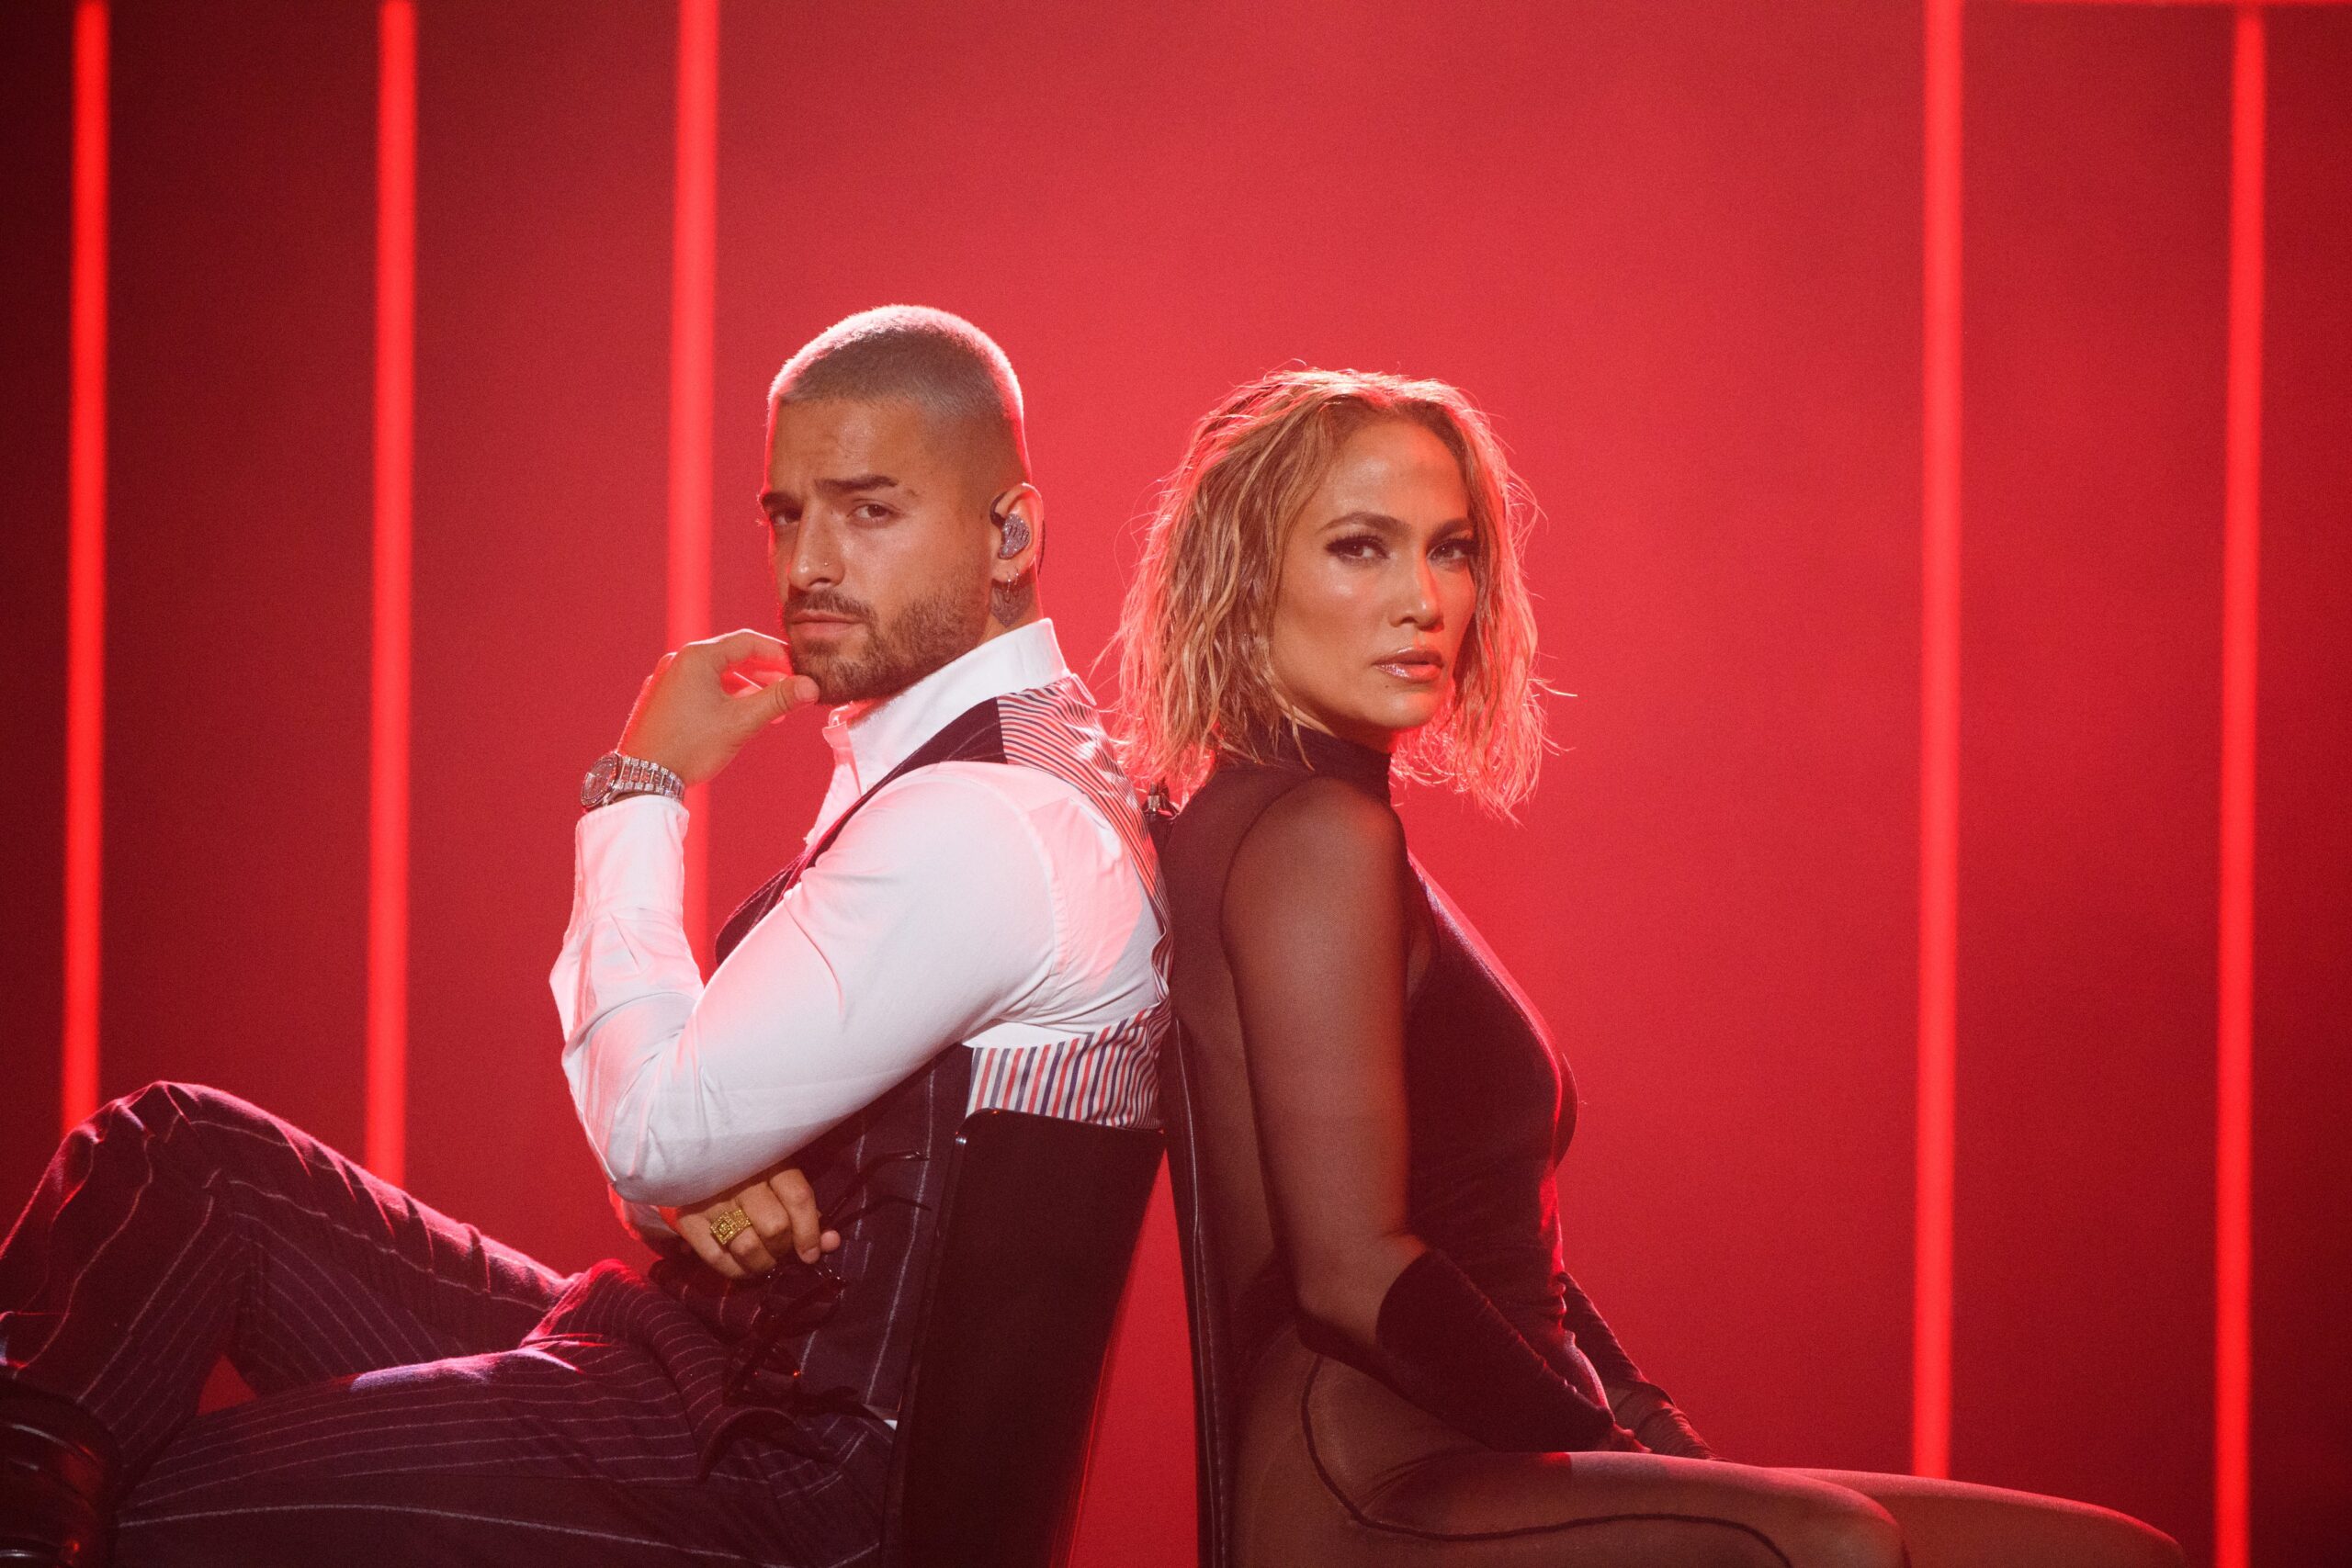 JLO’s Performance At The AMAs Proves That Being 51 Is Just A Number